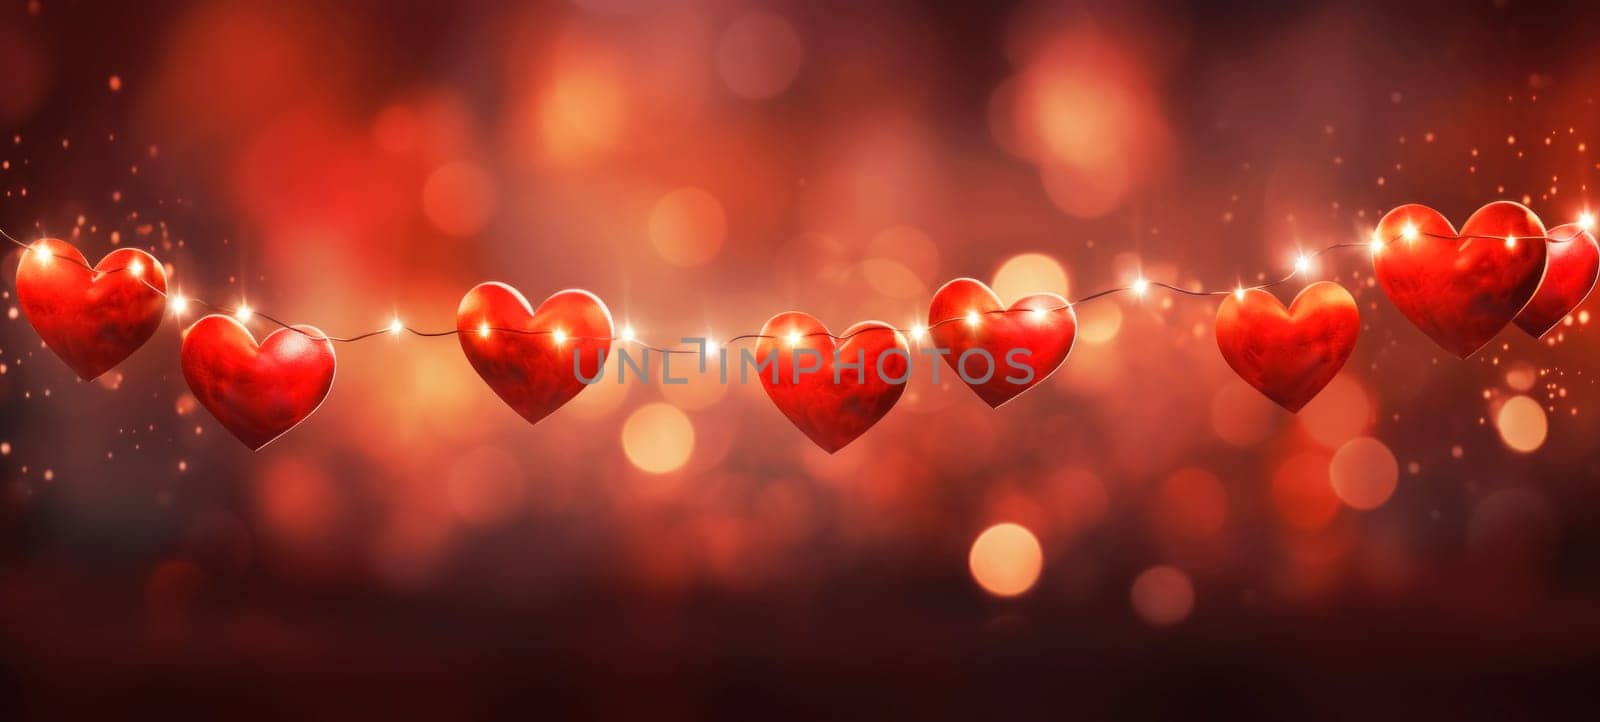 Heart-shaped balloons illuminated by twinkling lights against a dark romantic background, creating a magical atmosphere.